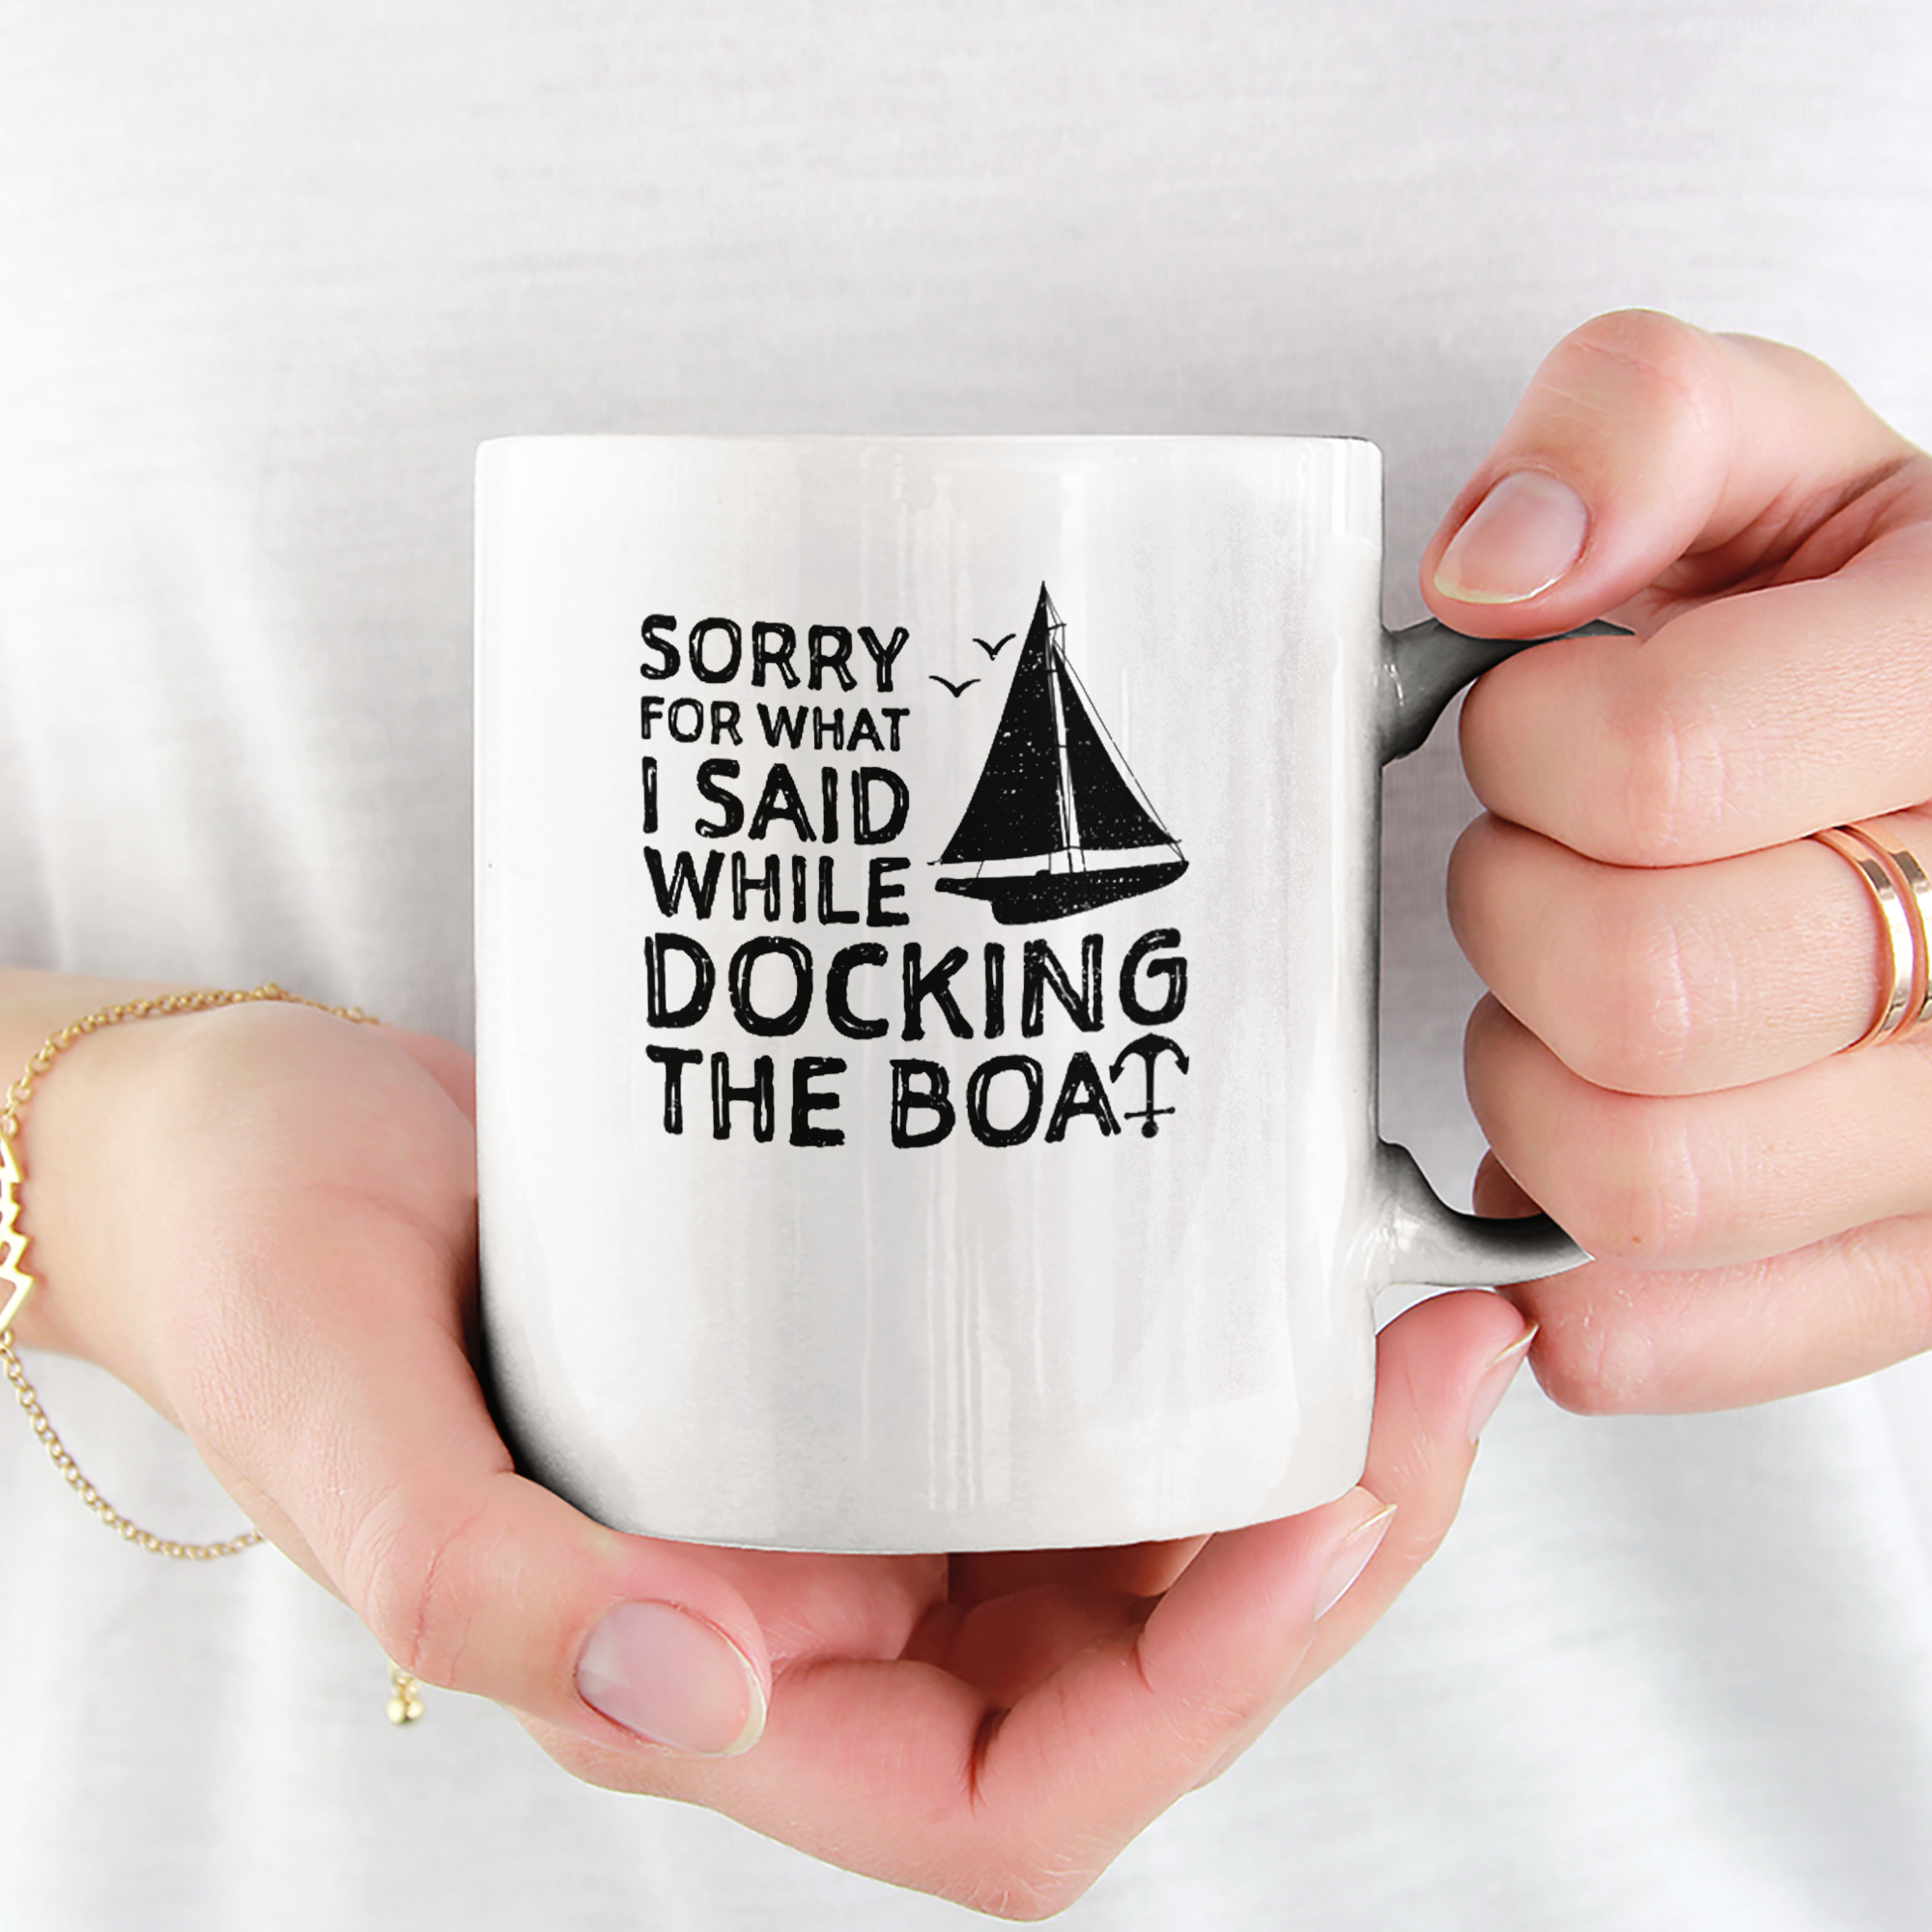 Sorry For What I Said While Docking The Boat Tasse - DESIGNSBYJNK5.COM